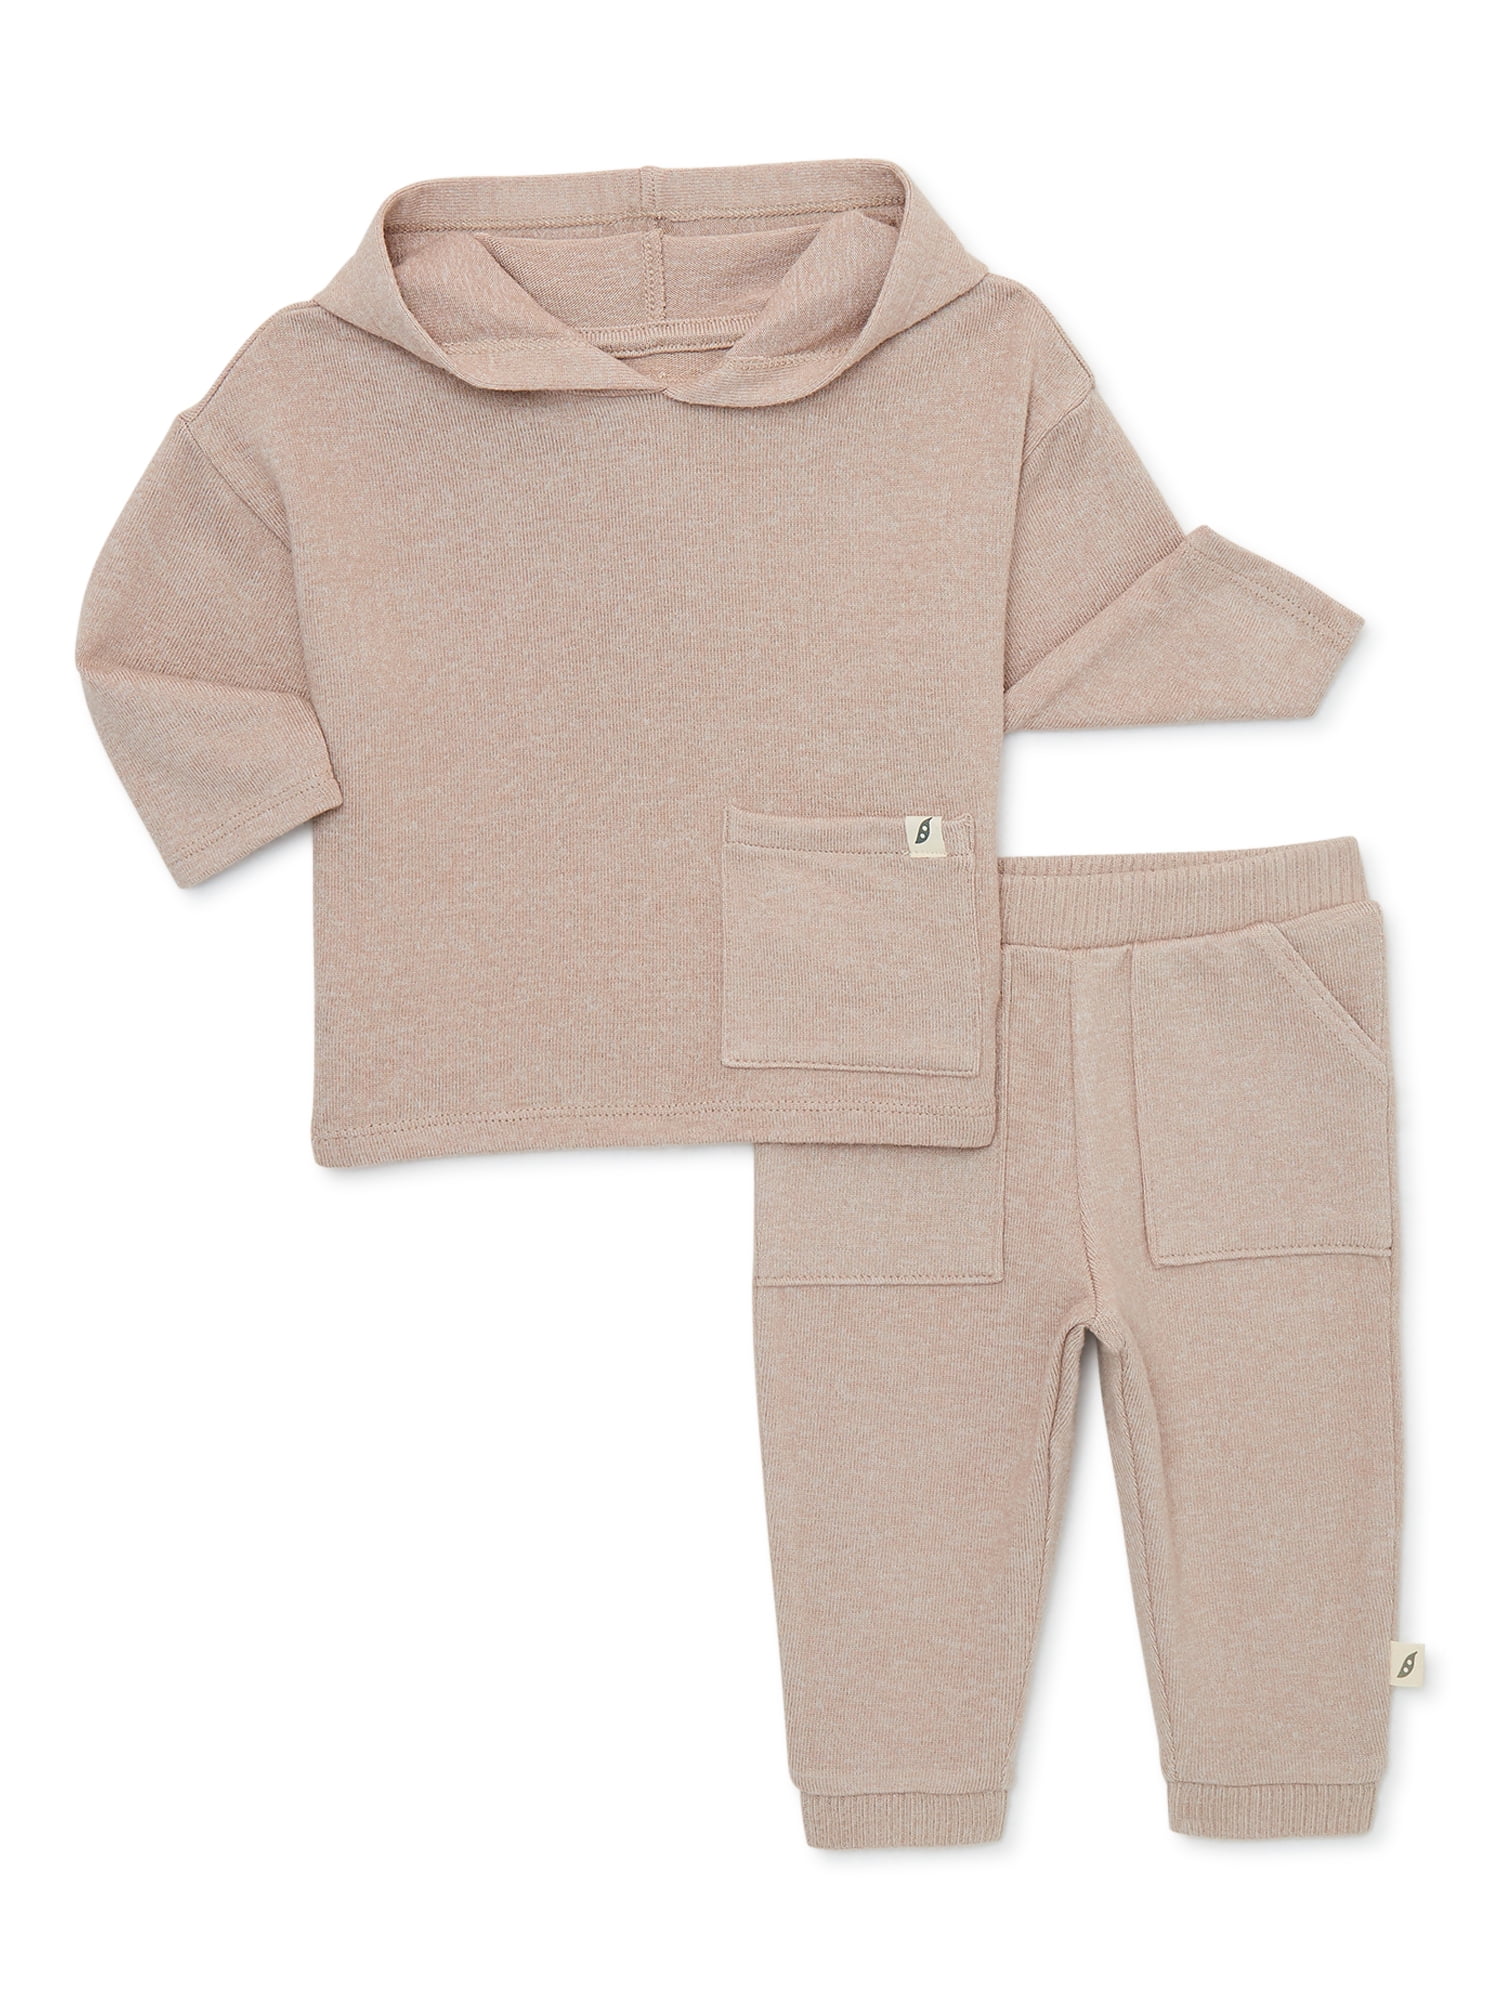 easy-peasy Baby Hoodie and Jogger Pants Outfit Set, 2-Piece, Sizes 0/3-24  Months 